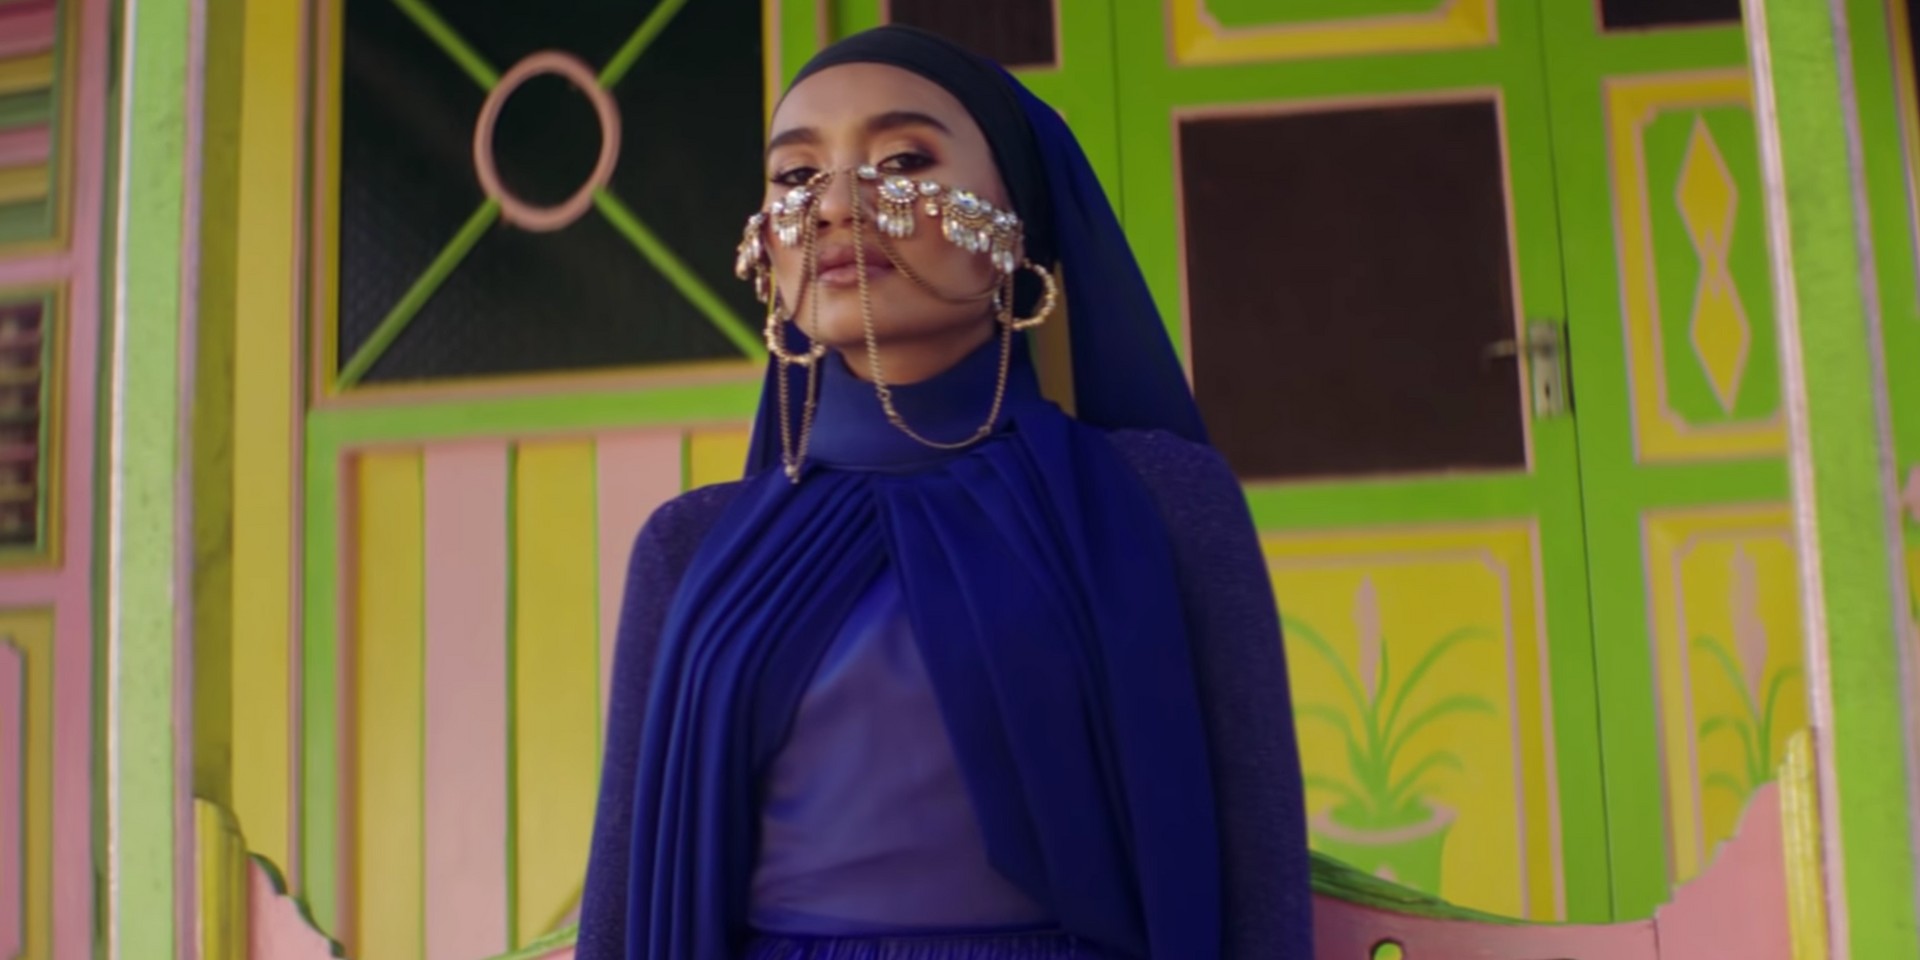 Yuna shows off the aesthetic diversity of Malaysia in music video for 'Forevermore' – watch 